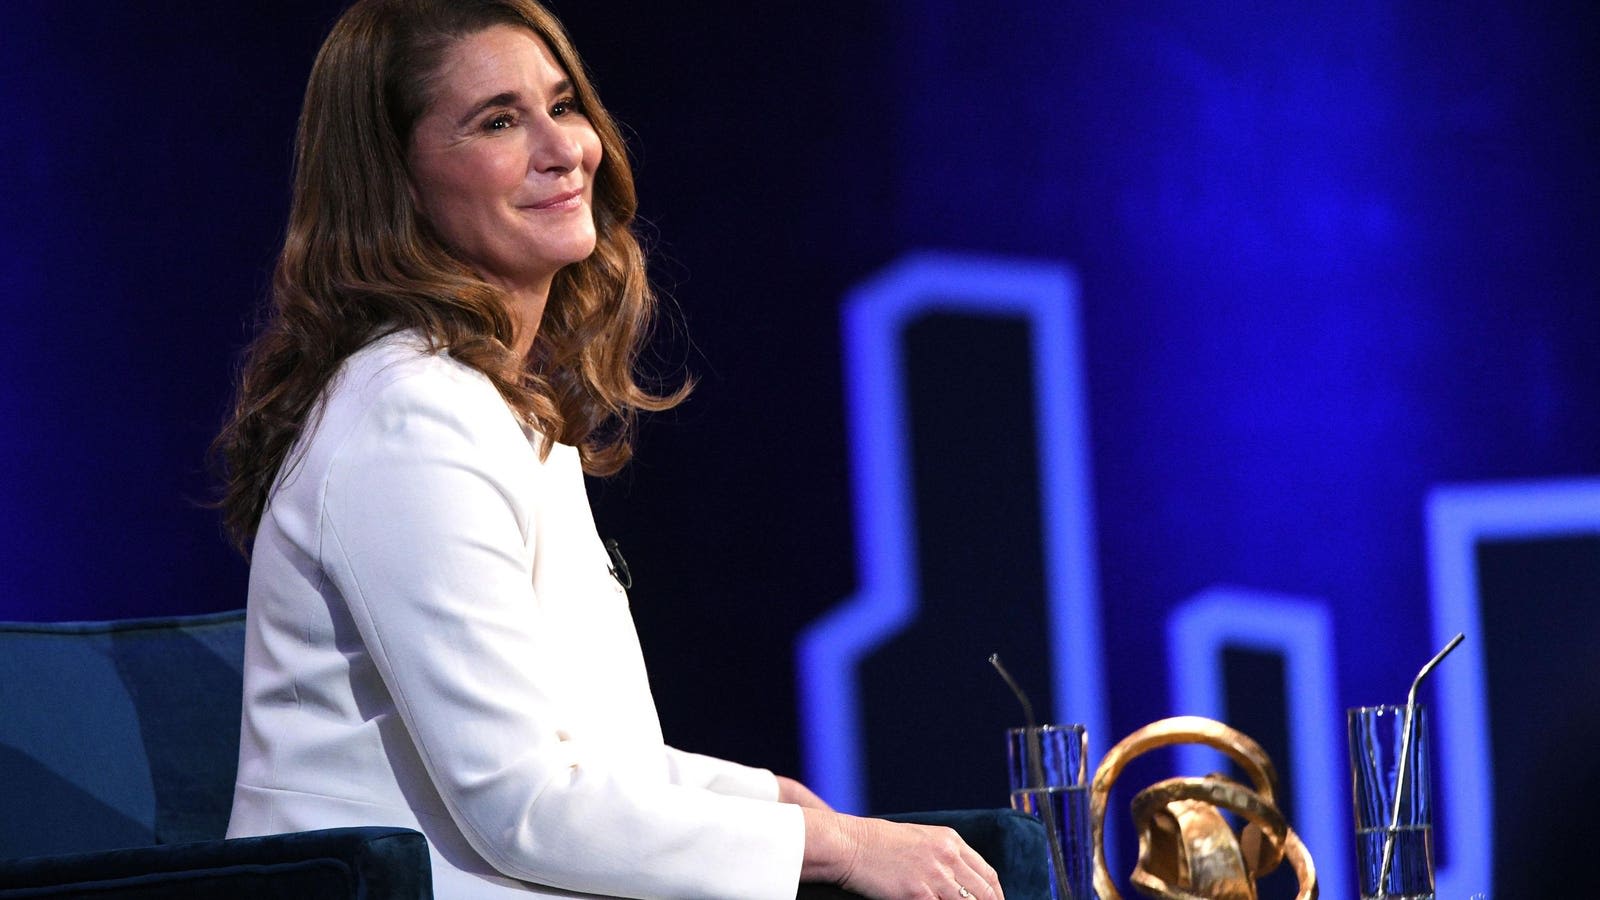 Forbes Daily: The Next Philanthropic Chapter For Melinda French Gates